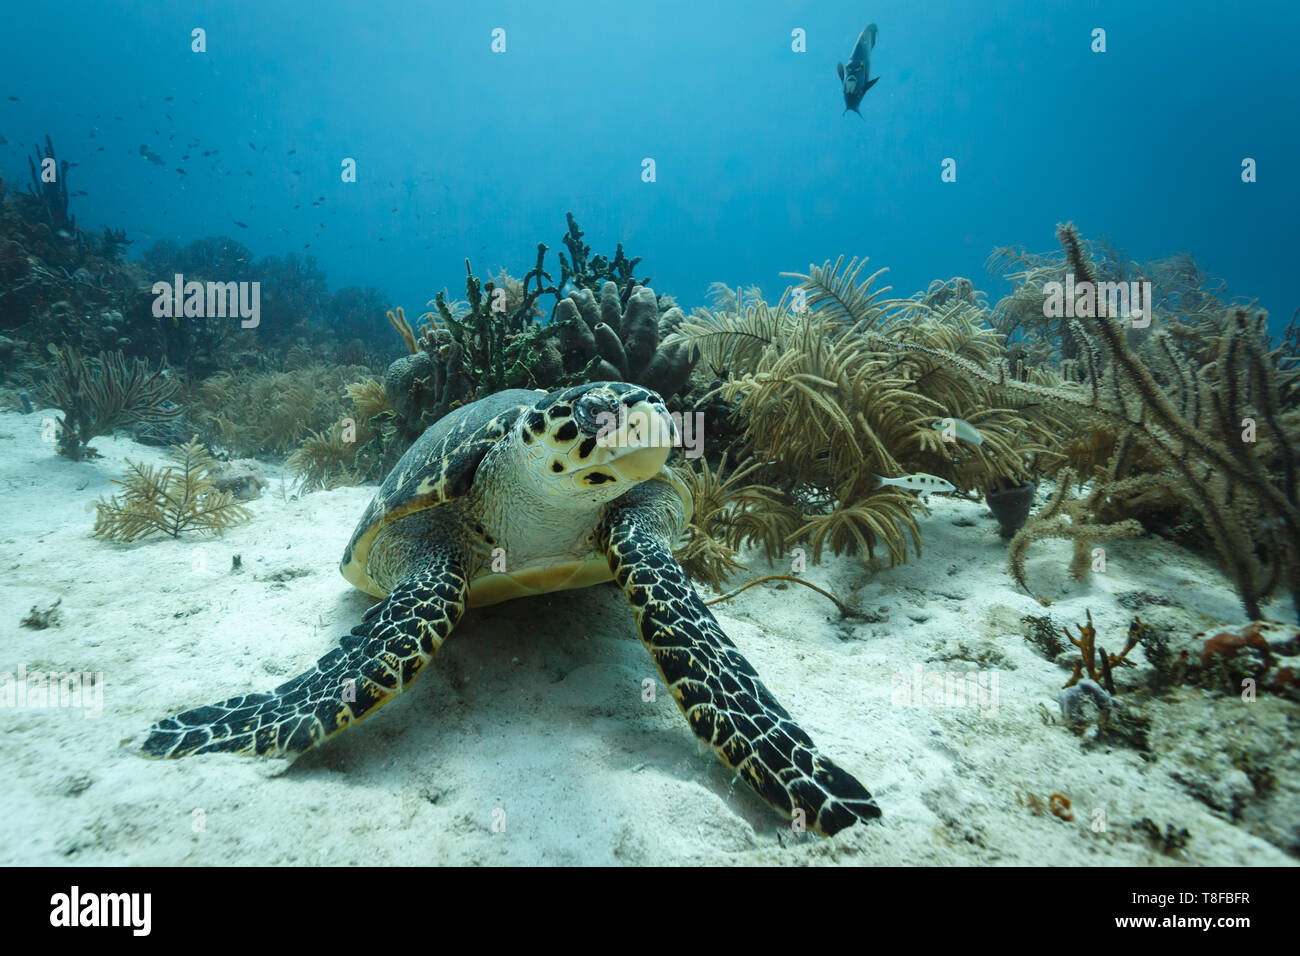 front view of hawksbill turtle,Eretmochelys imbricata, on sandy coral reef Stock Photo